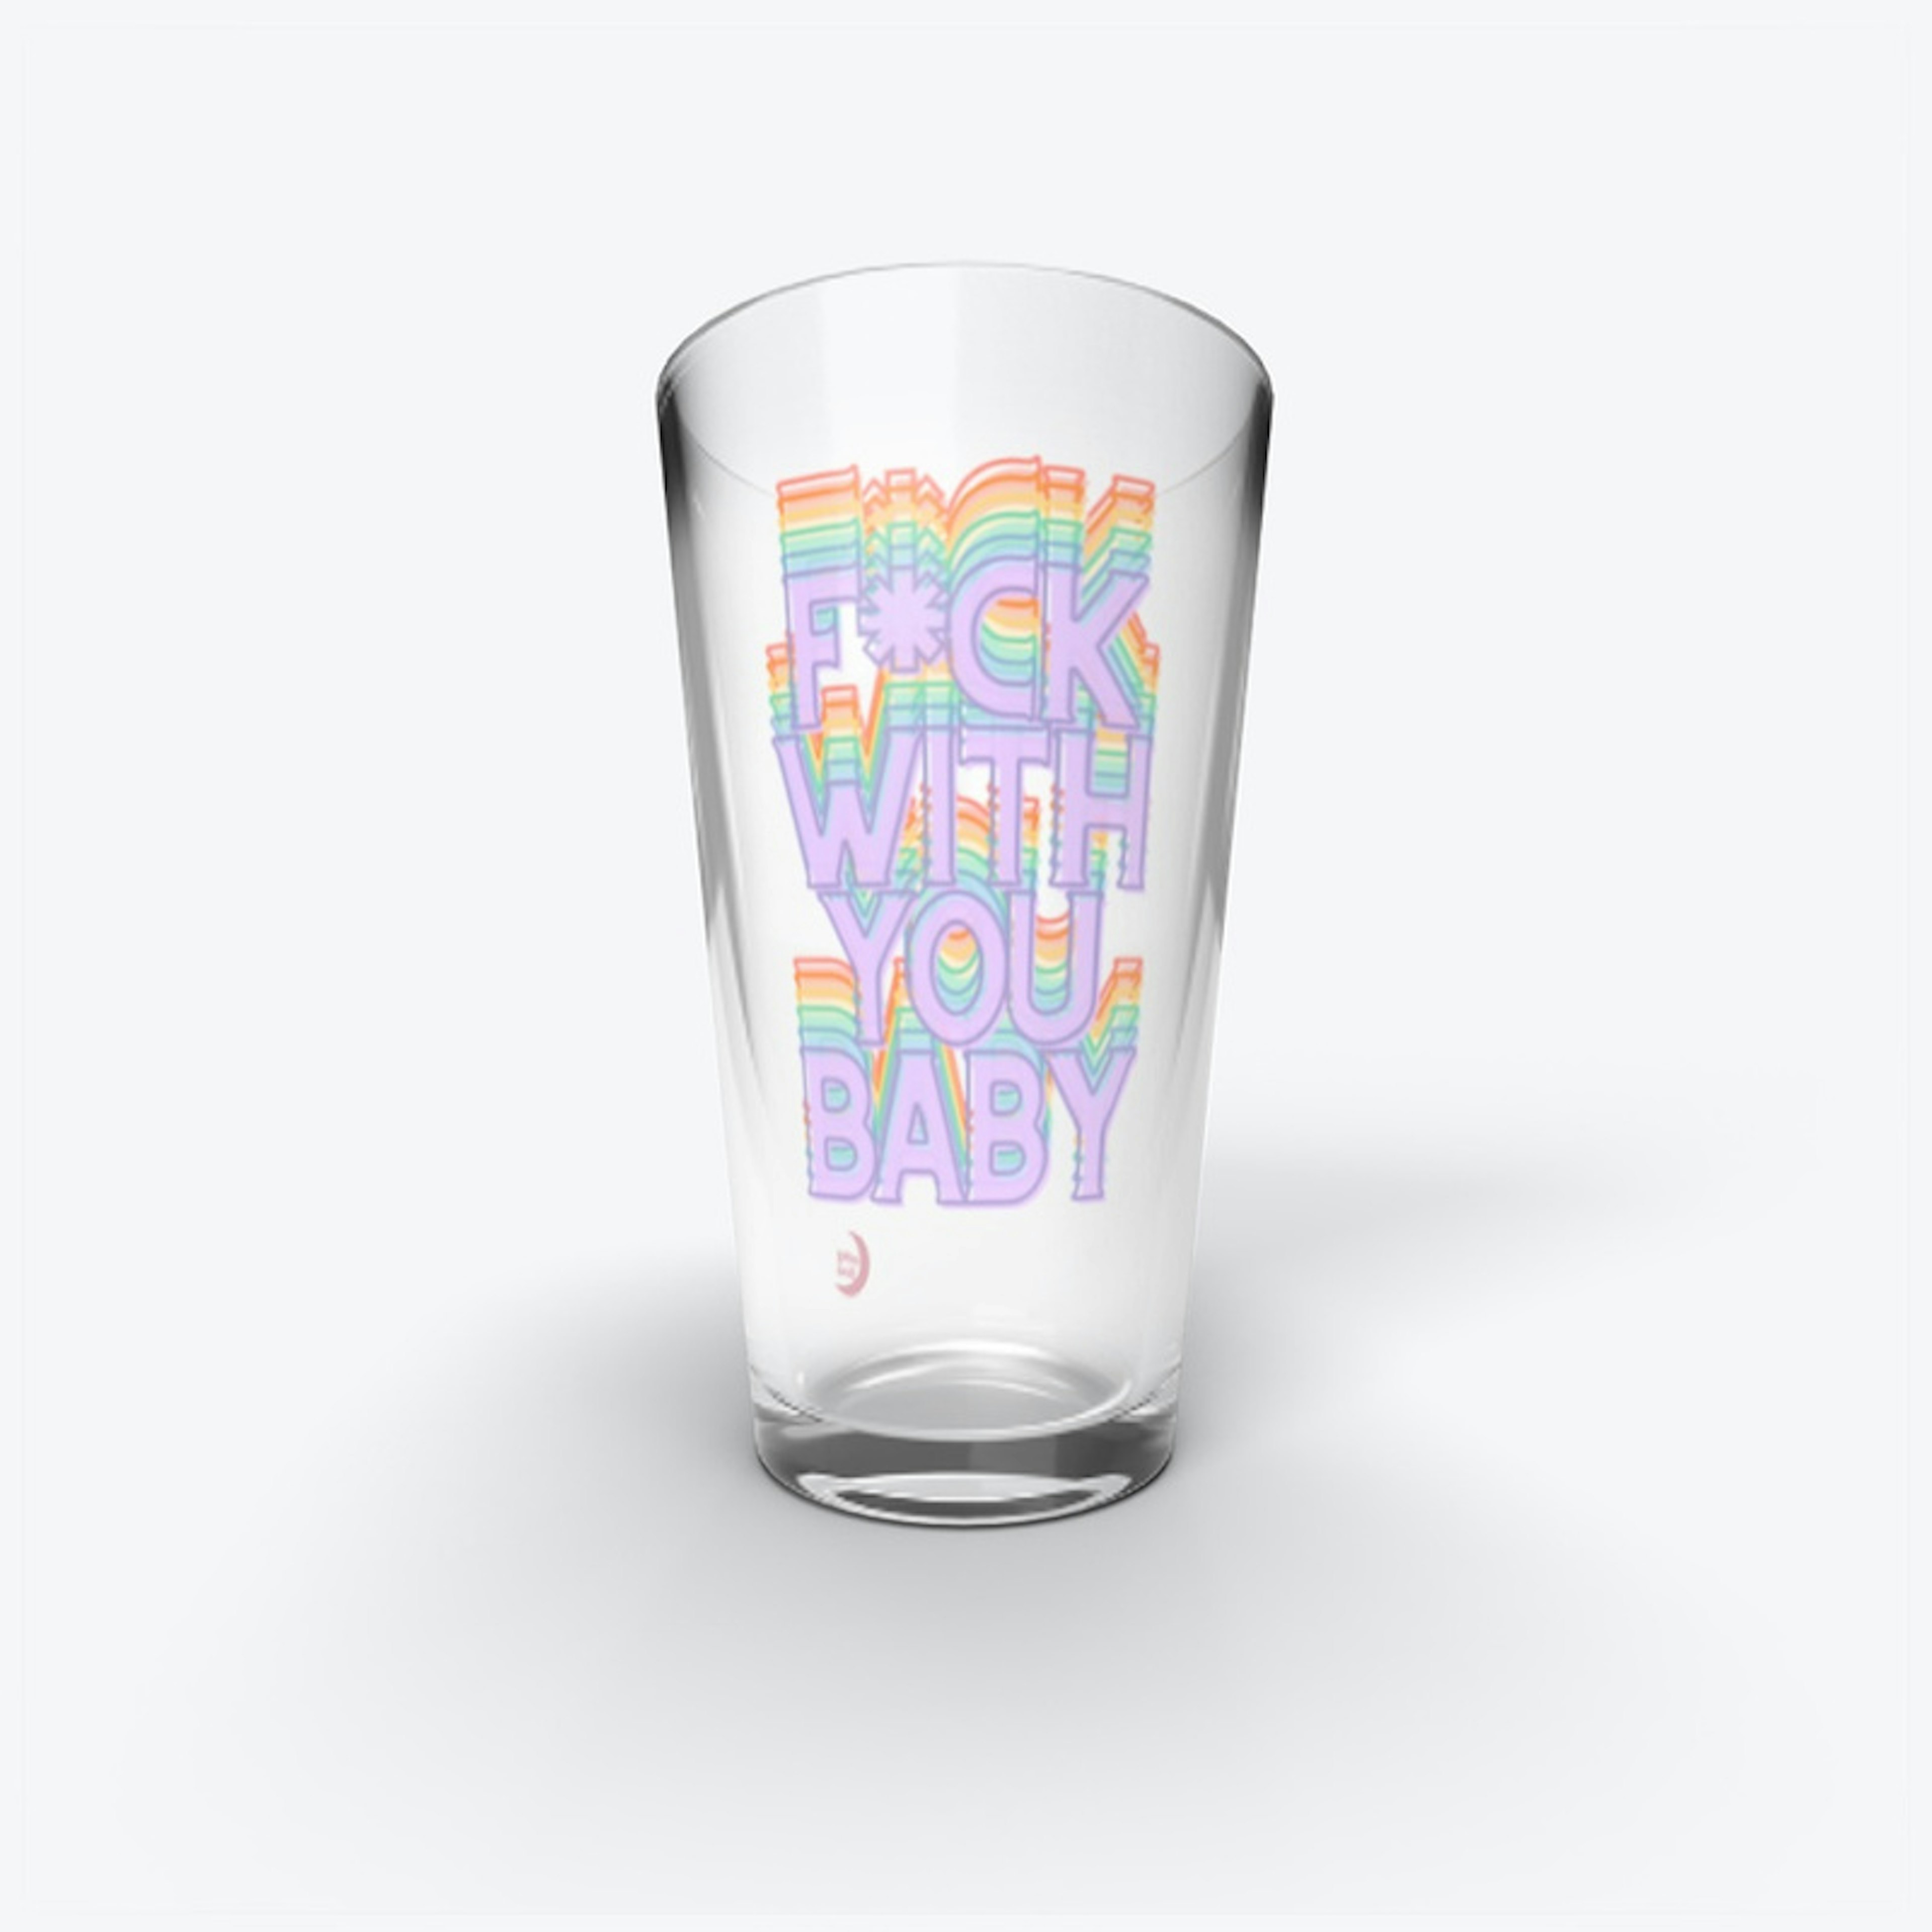 F*ck With You Baby Pride Merch! 